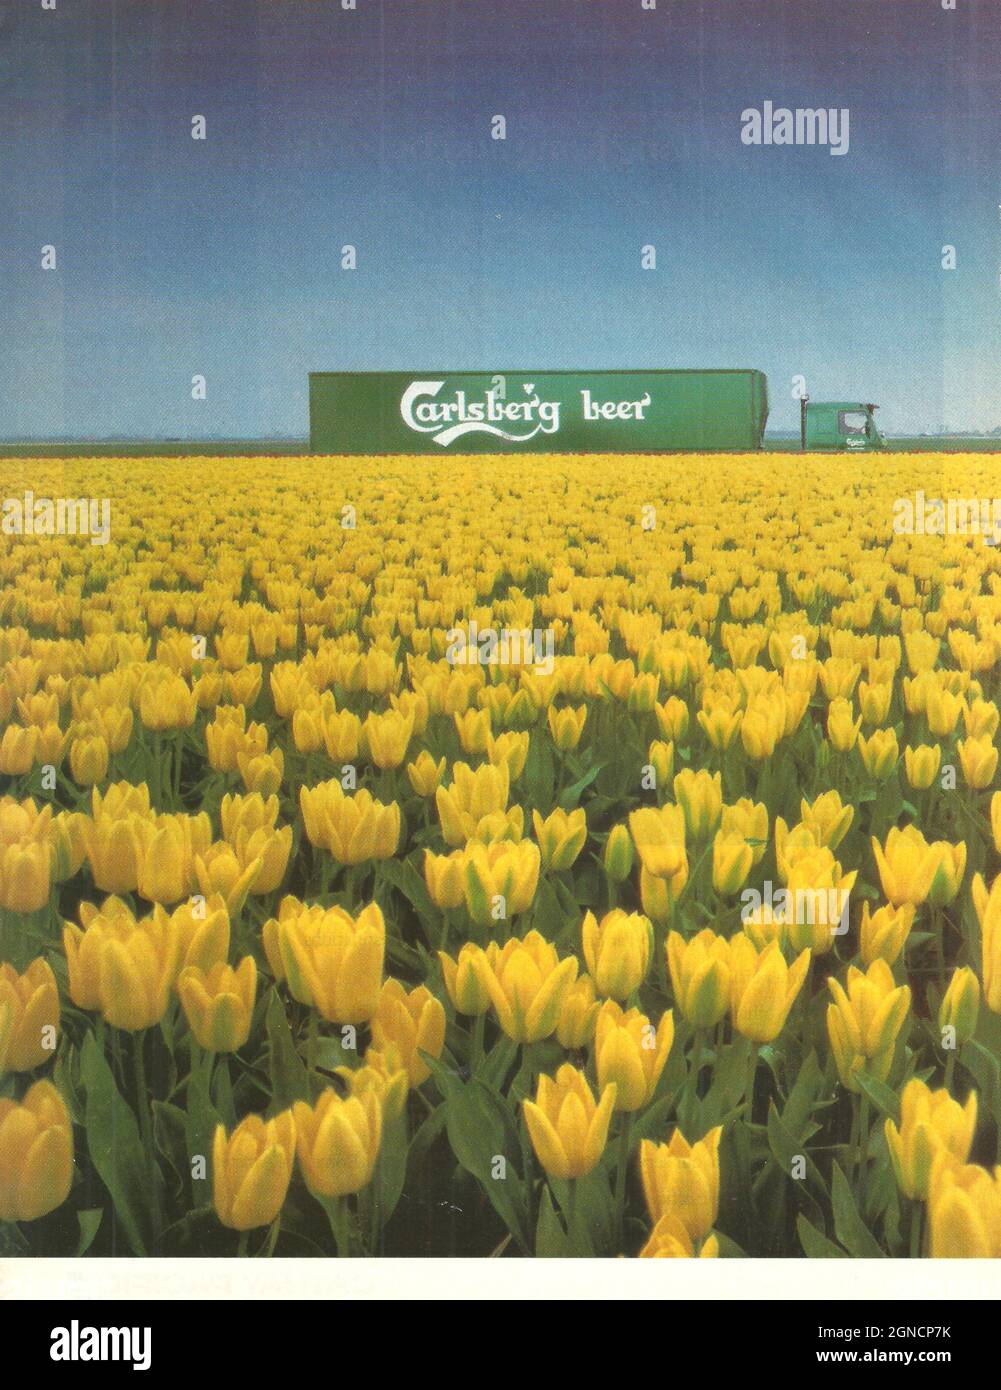 Vintage advertisement of Carlsberg beer Probably the best beer in the world 1970s 1980s paper advert magazine advert Stock Photo